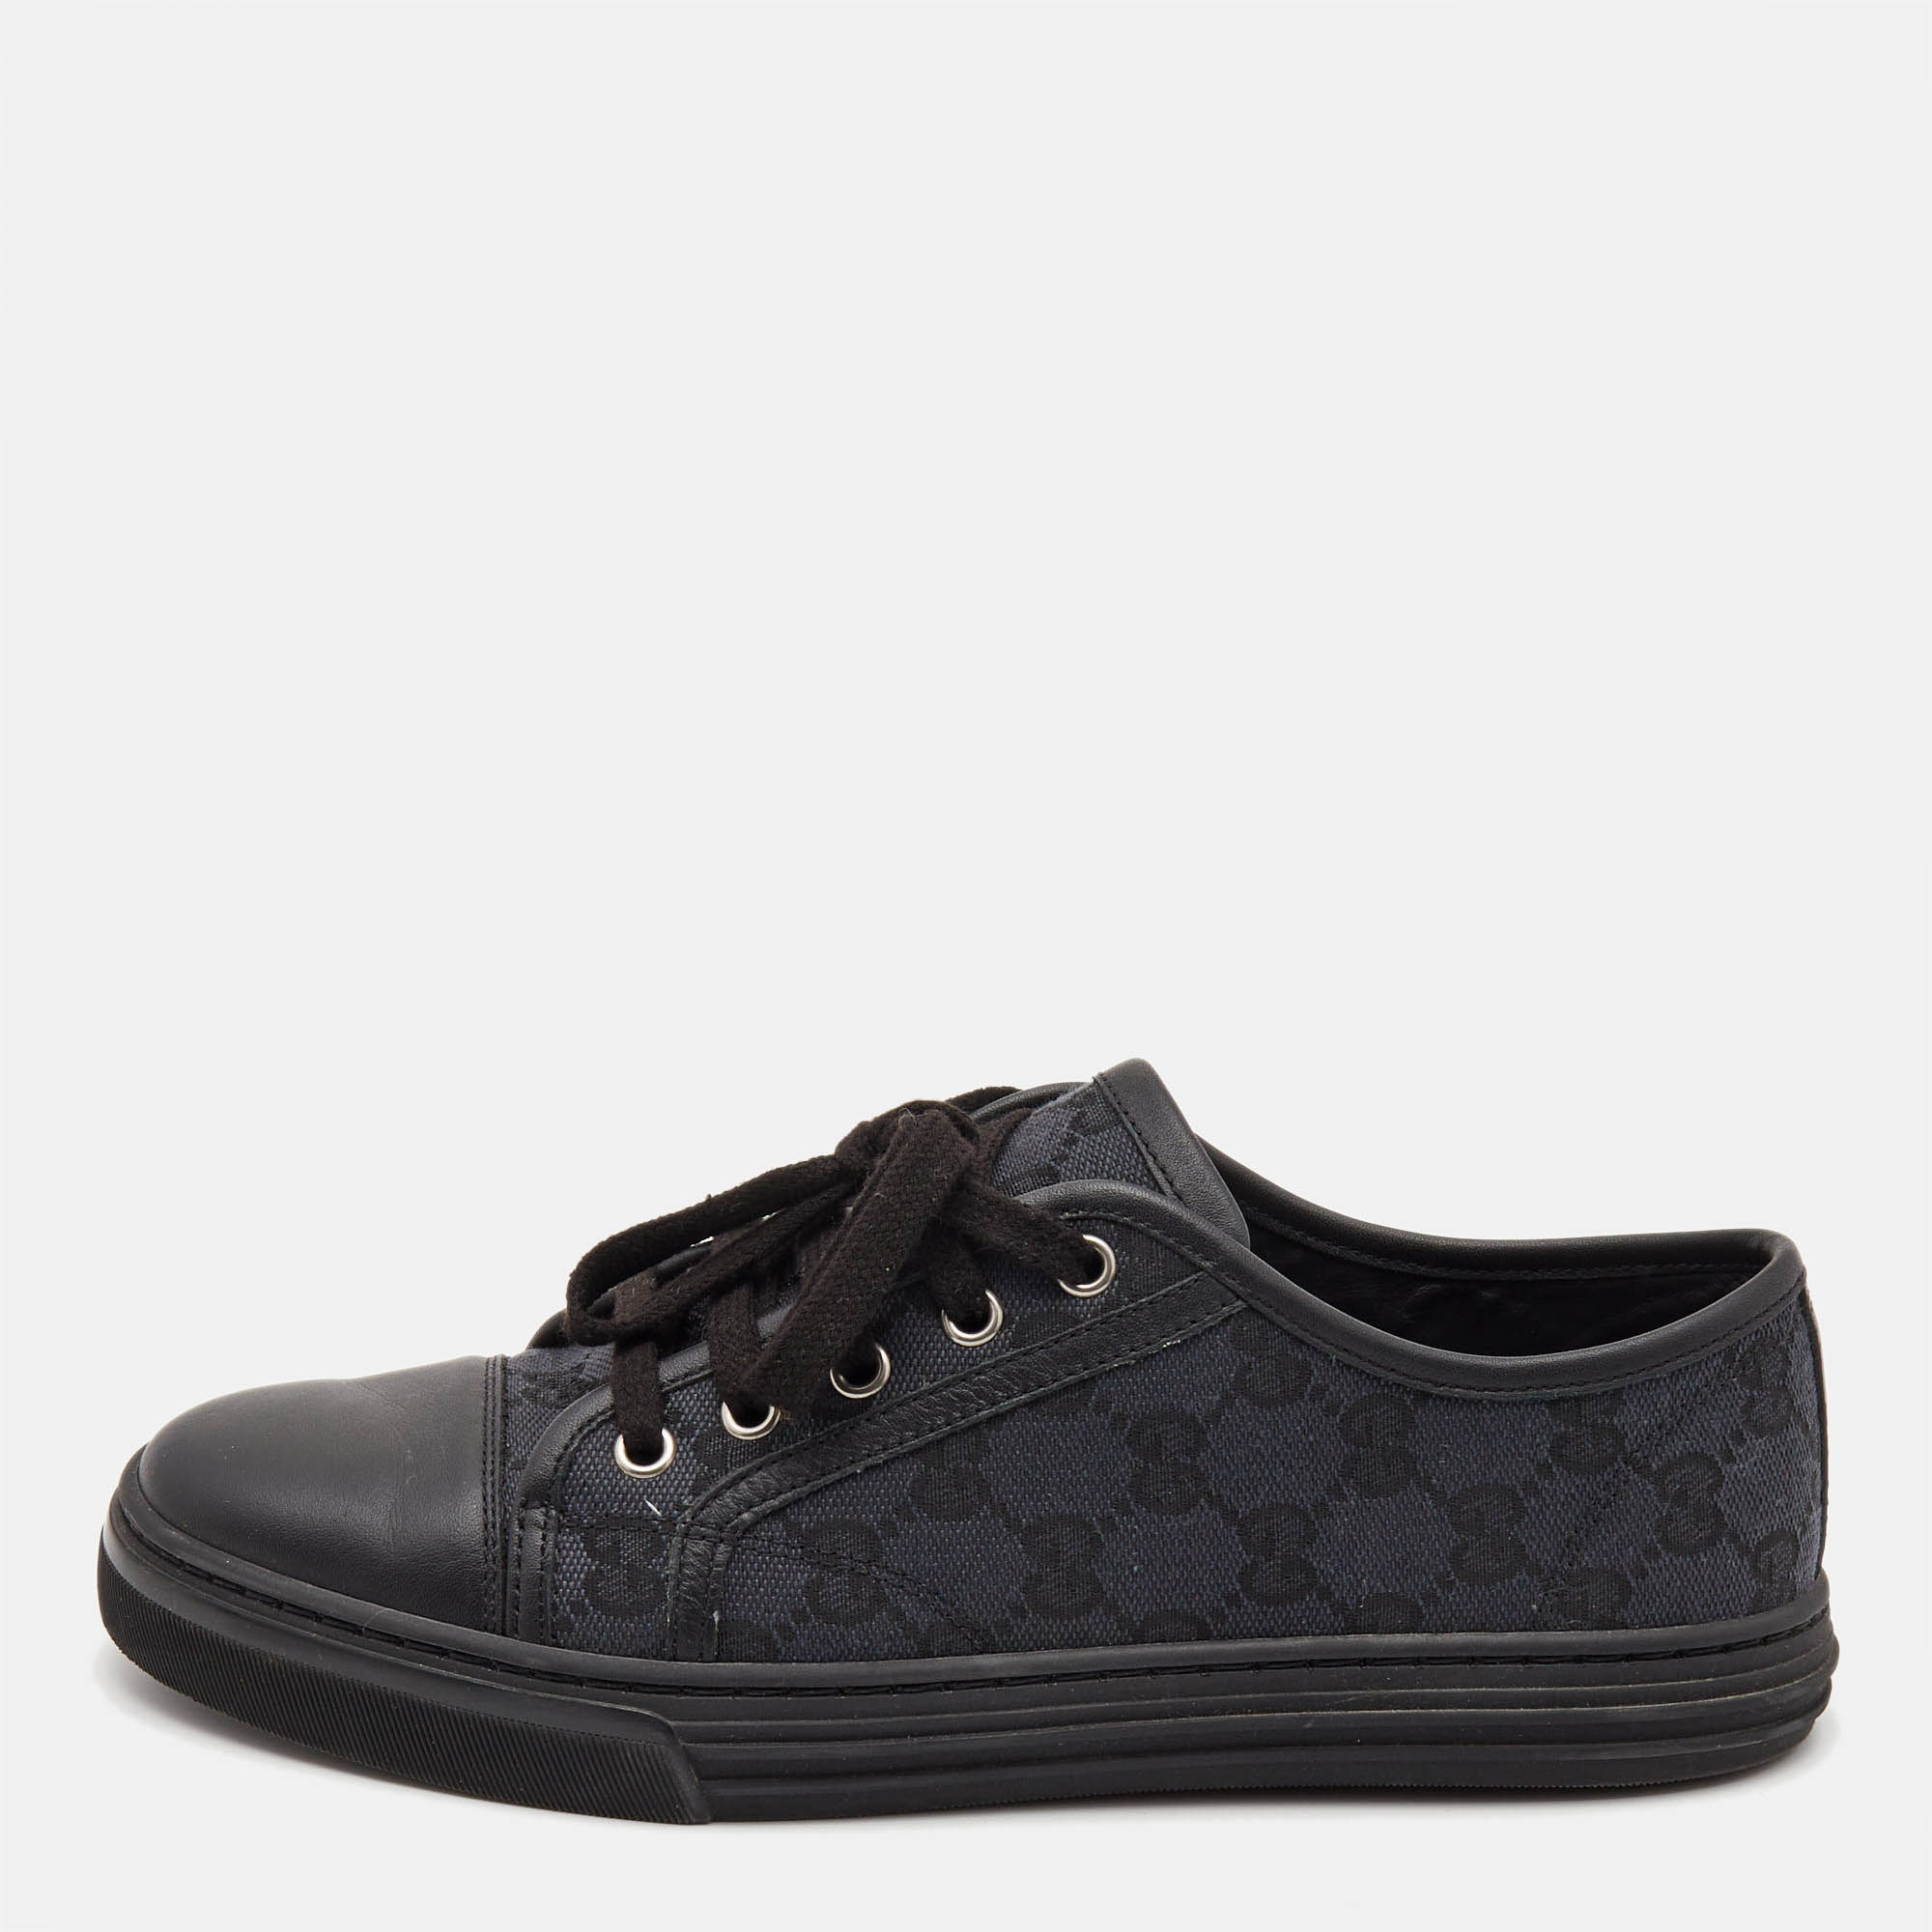 Gucci two tone gg canvas and leather low top sneakers size 38